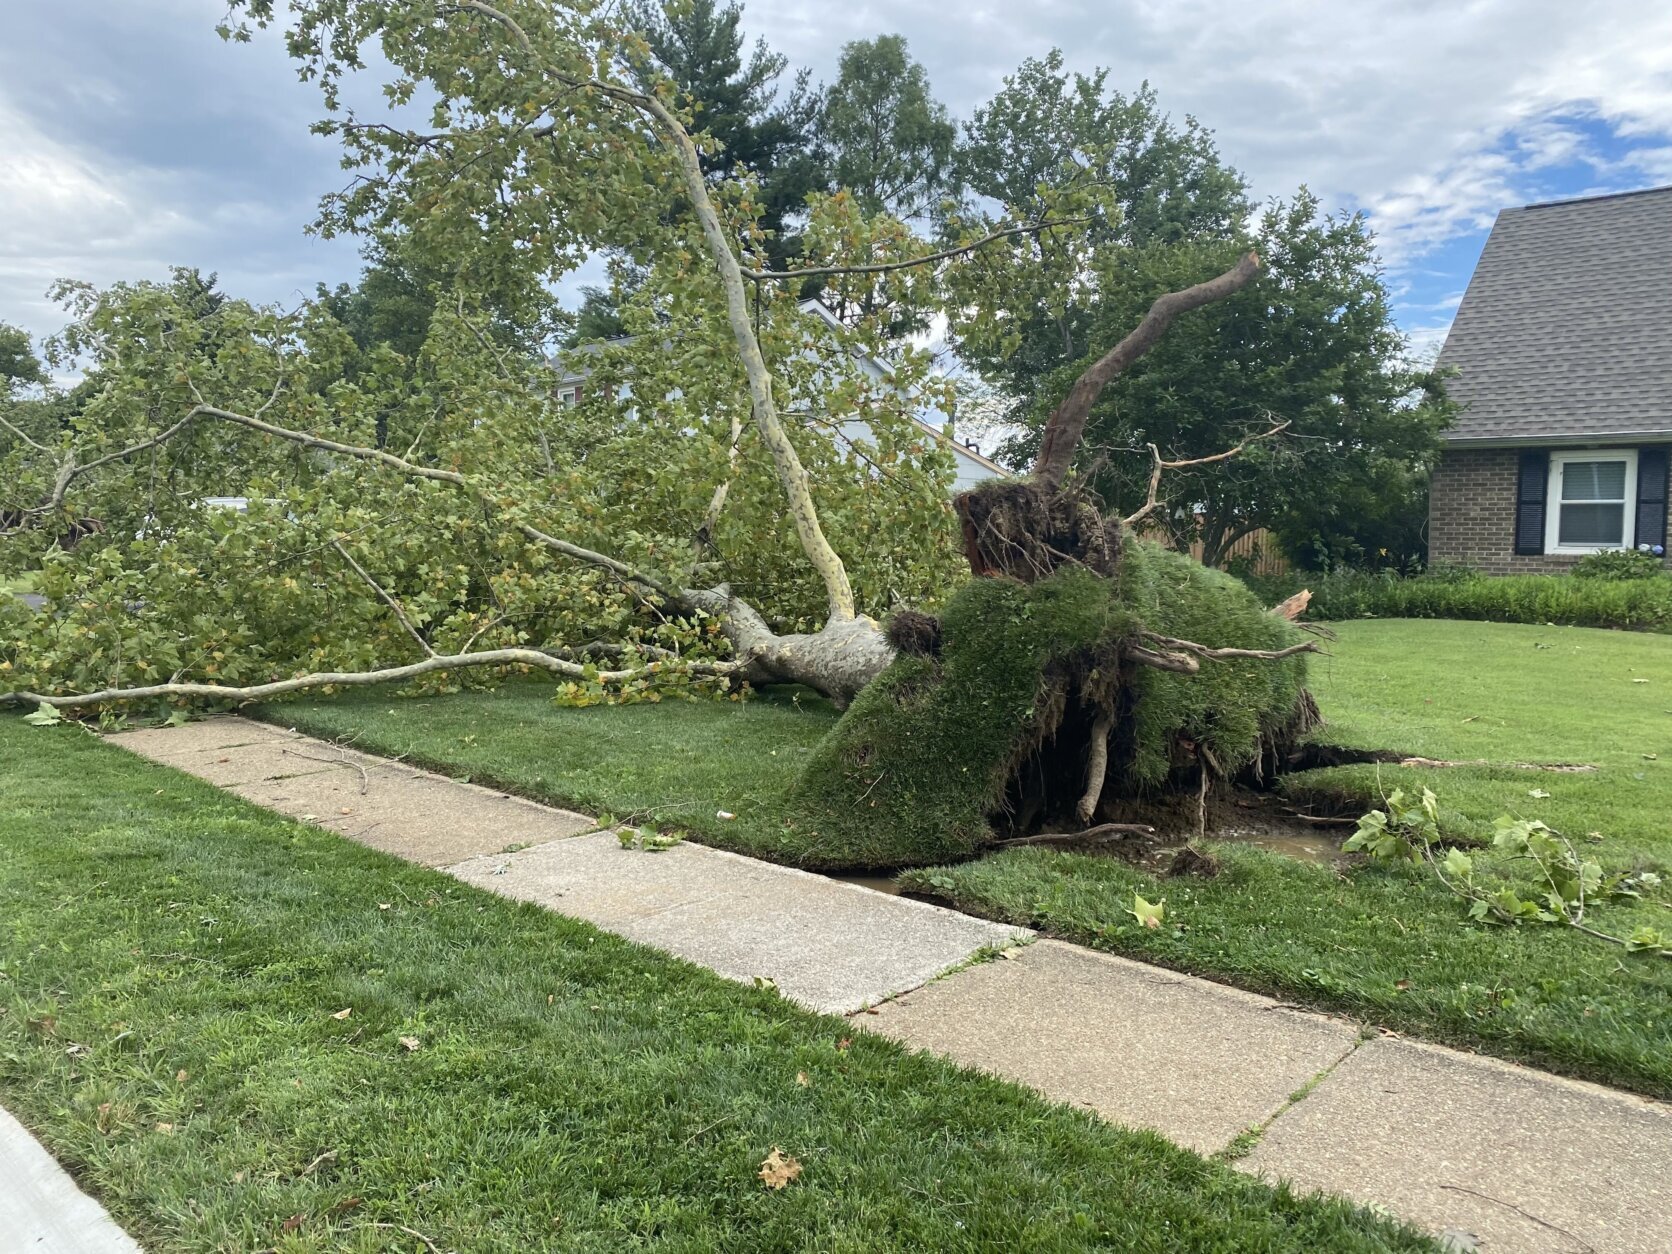 Severe weather Tuesday uprooted trees in Bowie, Maryland.